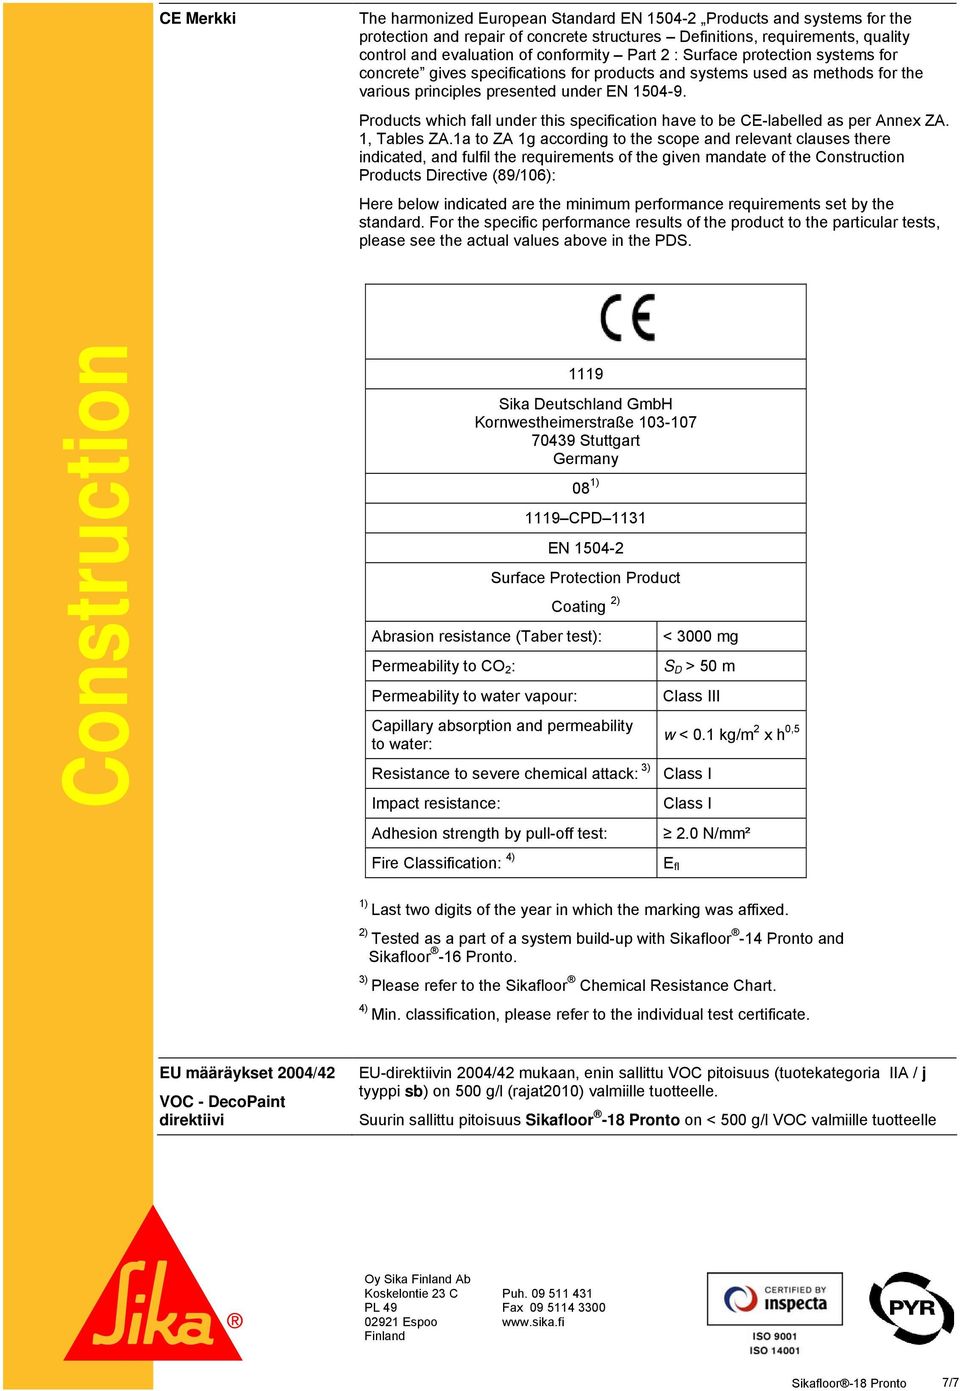 Products which fall under this specification have to be CE-labelled as per Annex ZA. 1, Tables ZA.